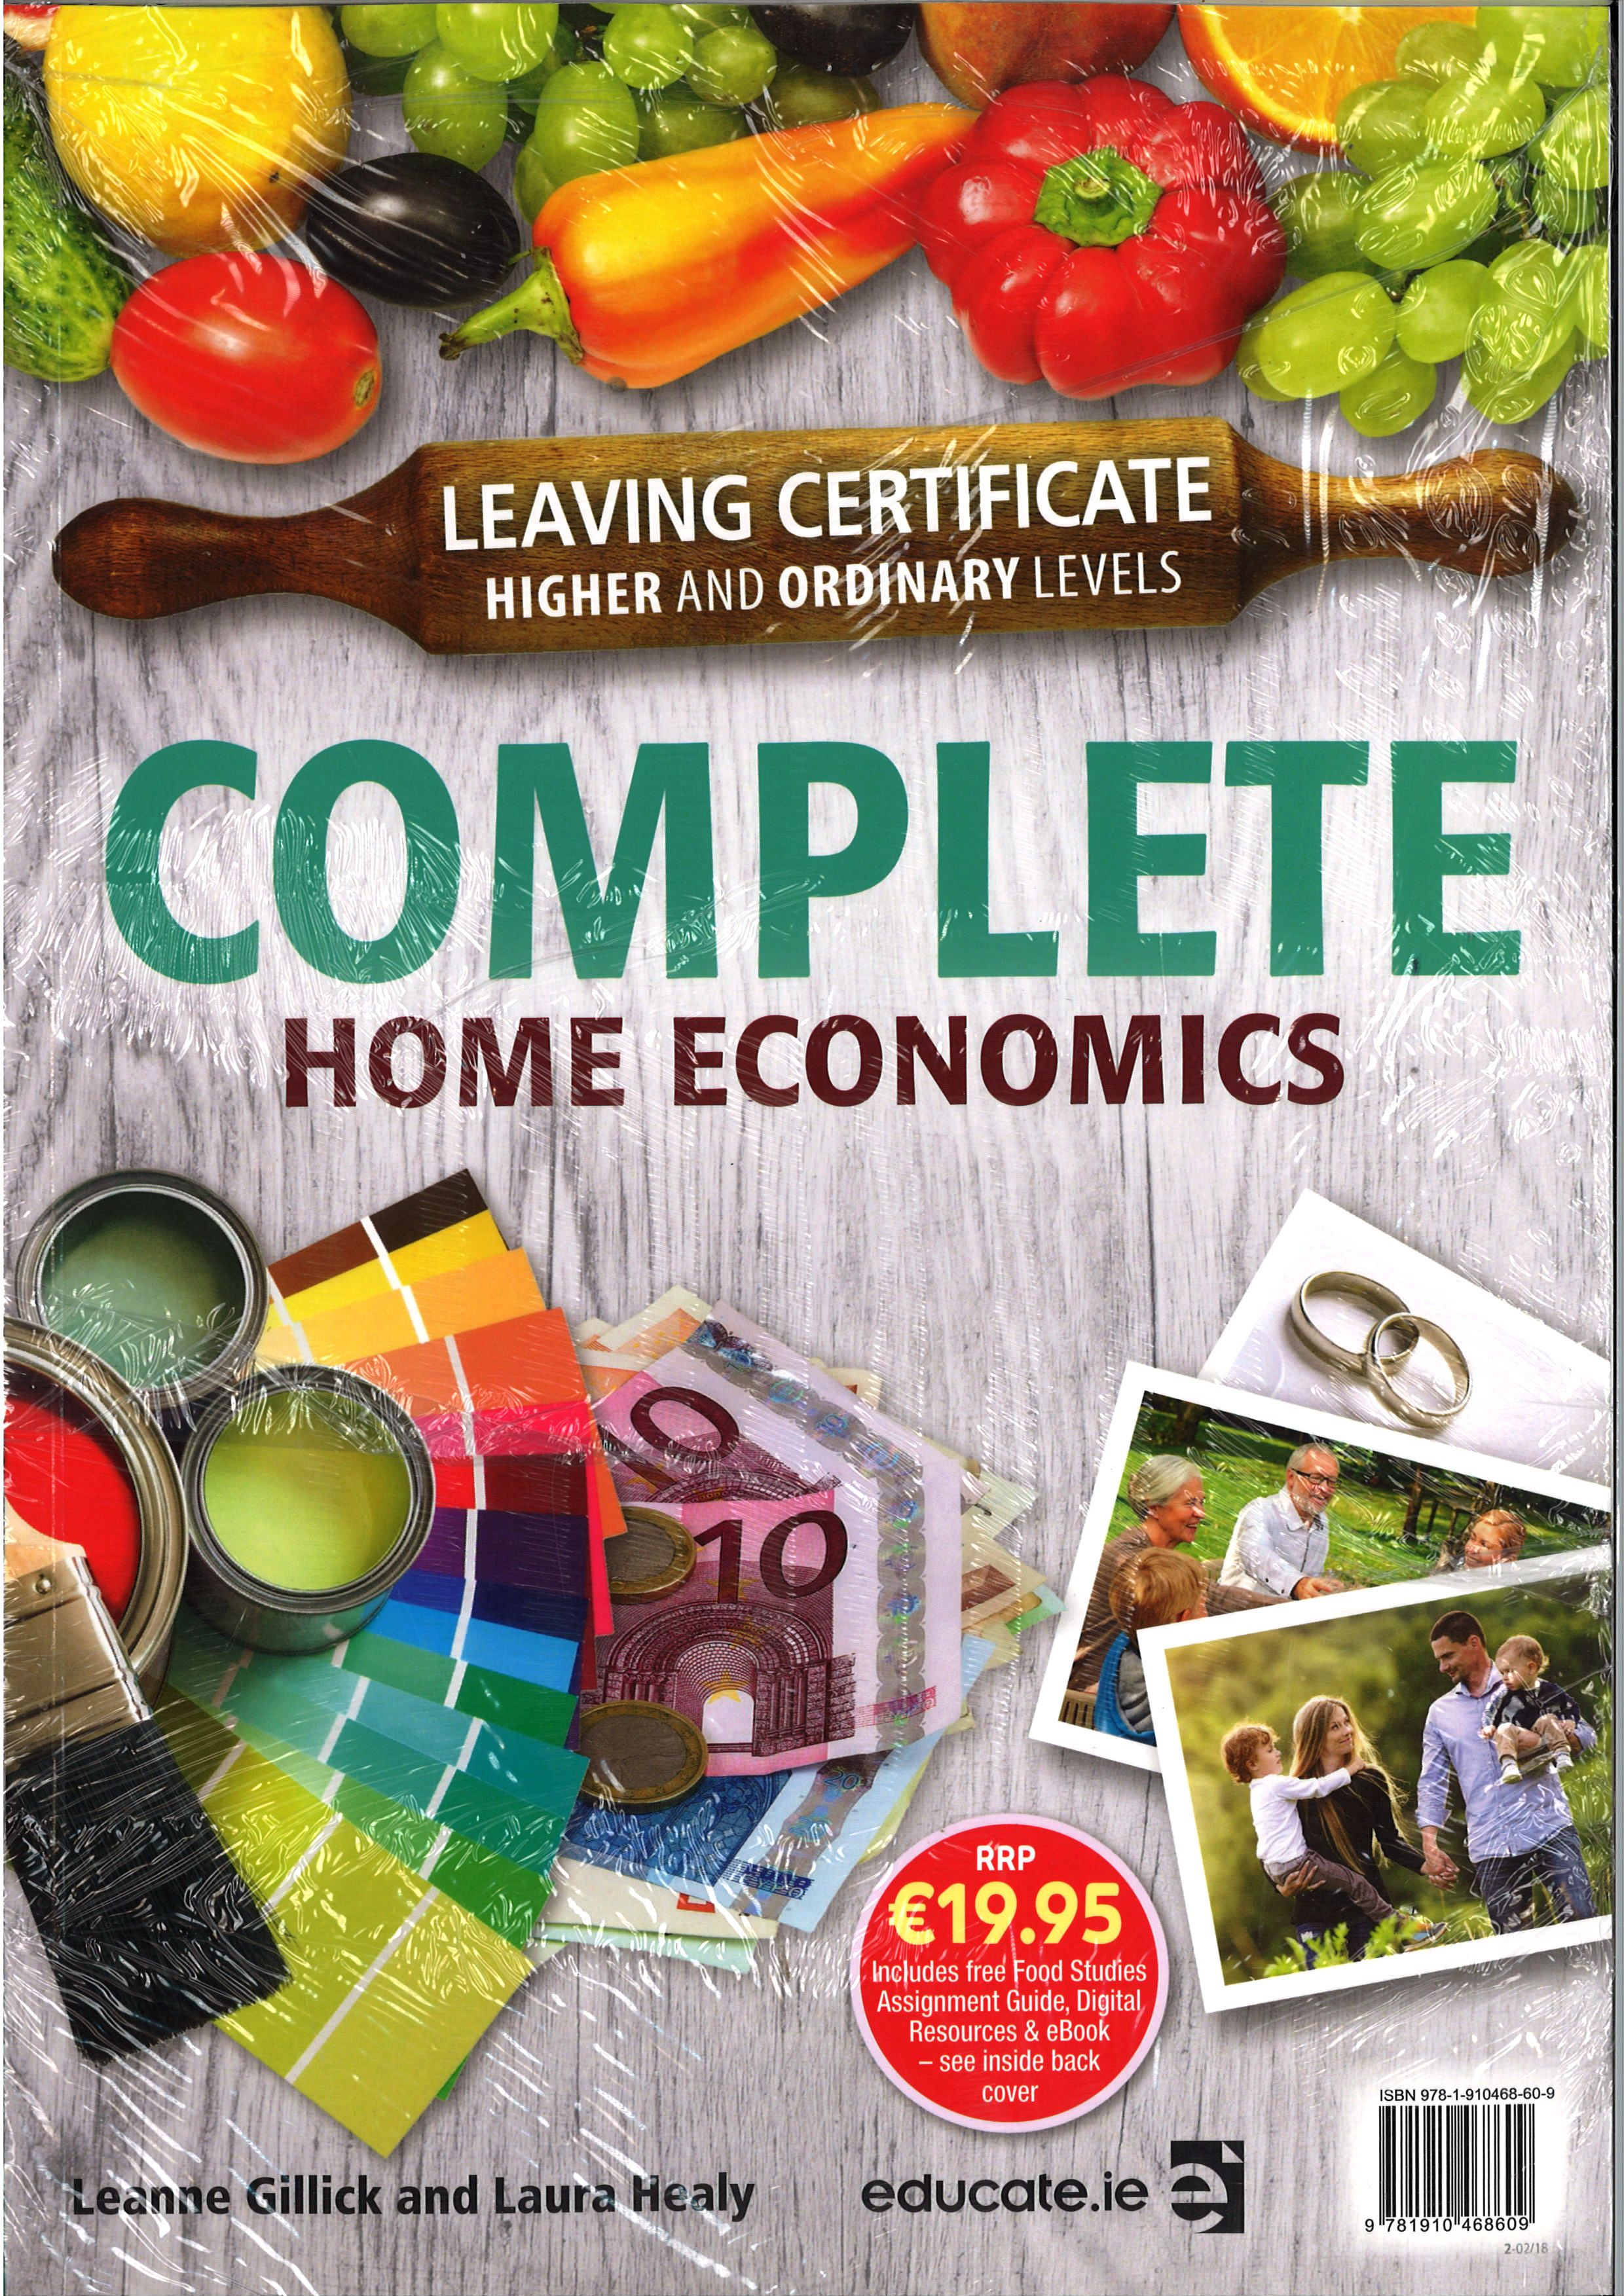 Complete Home Economics Pack Textbook & Food Studies Assignment Guide